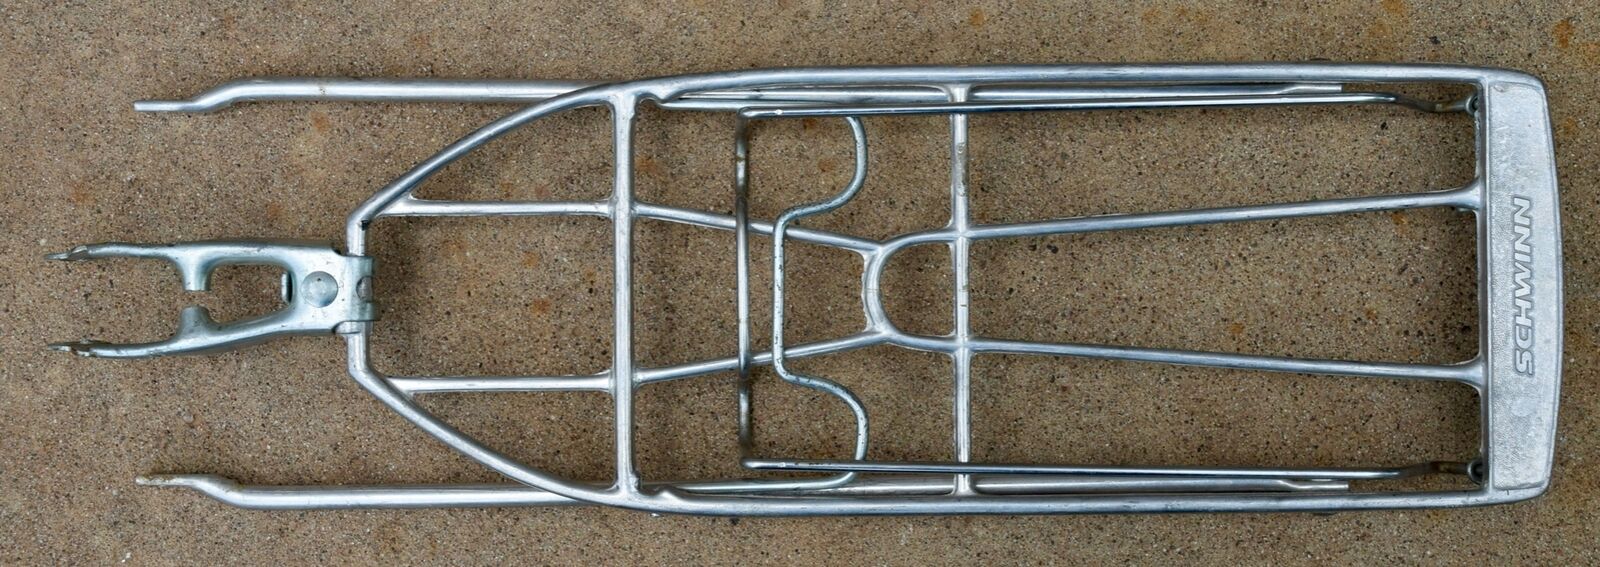 Vintage SWINN Approved Bicycle Rear Rat Trap Rack 60s' & 70s Alloy 27in Luggage